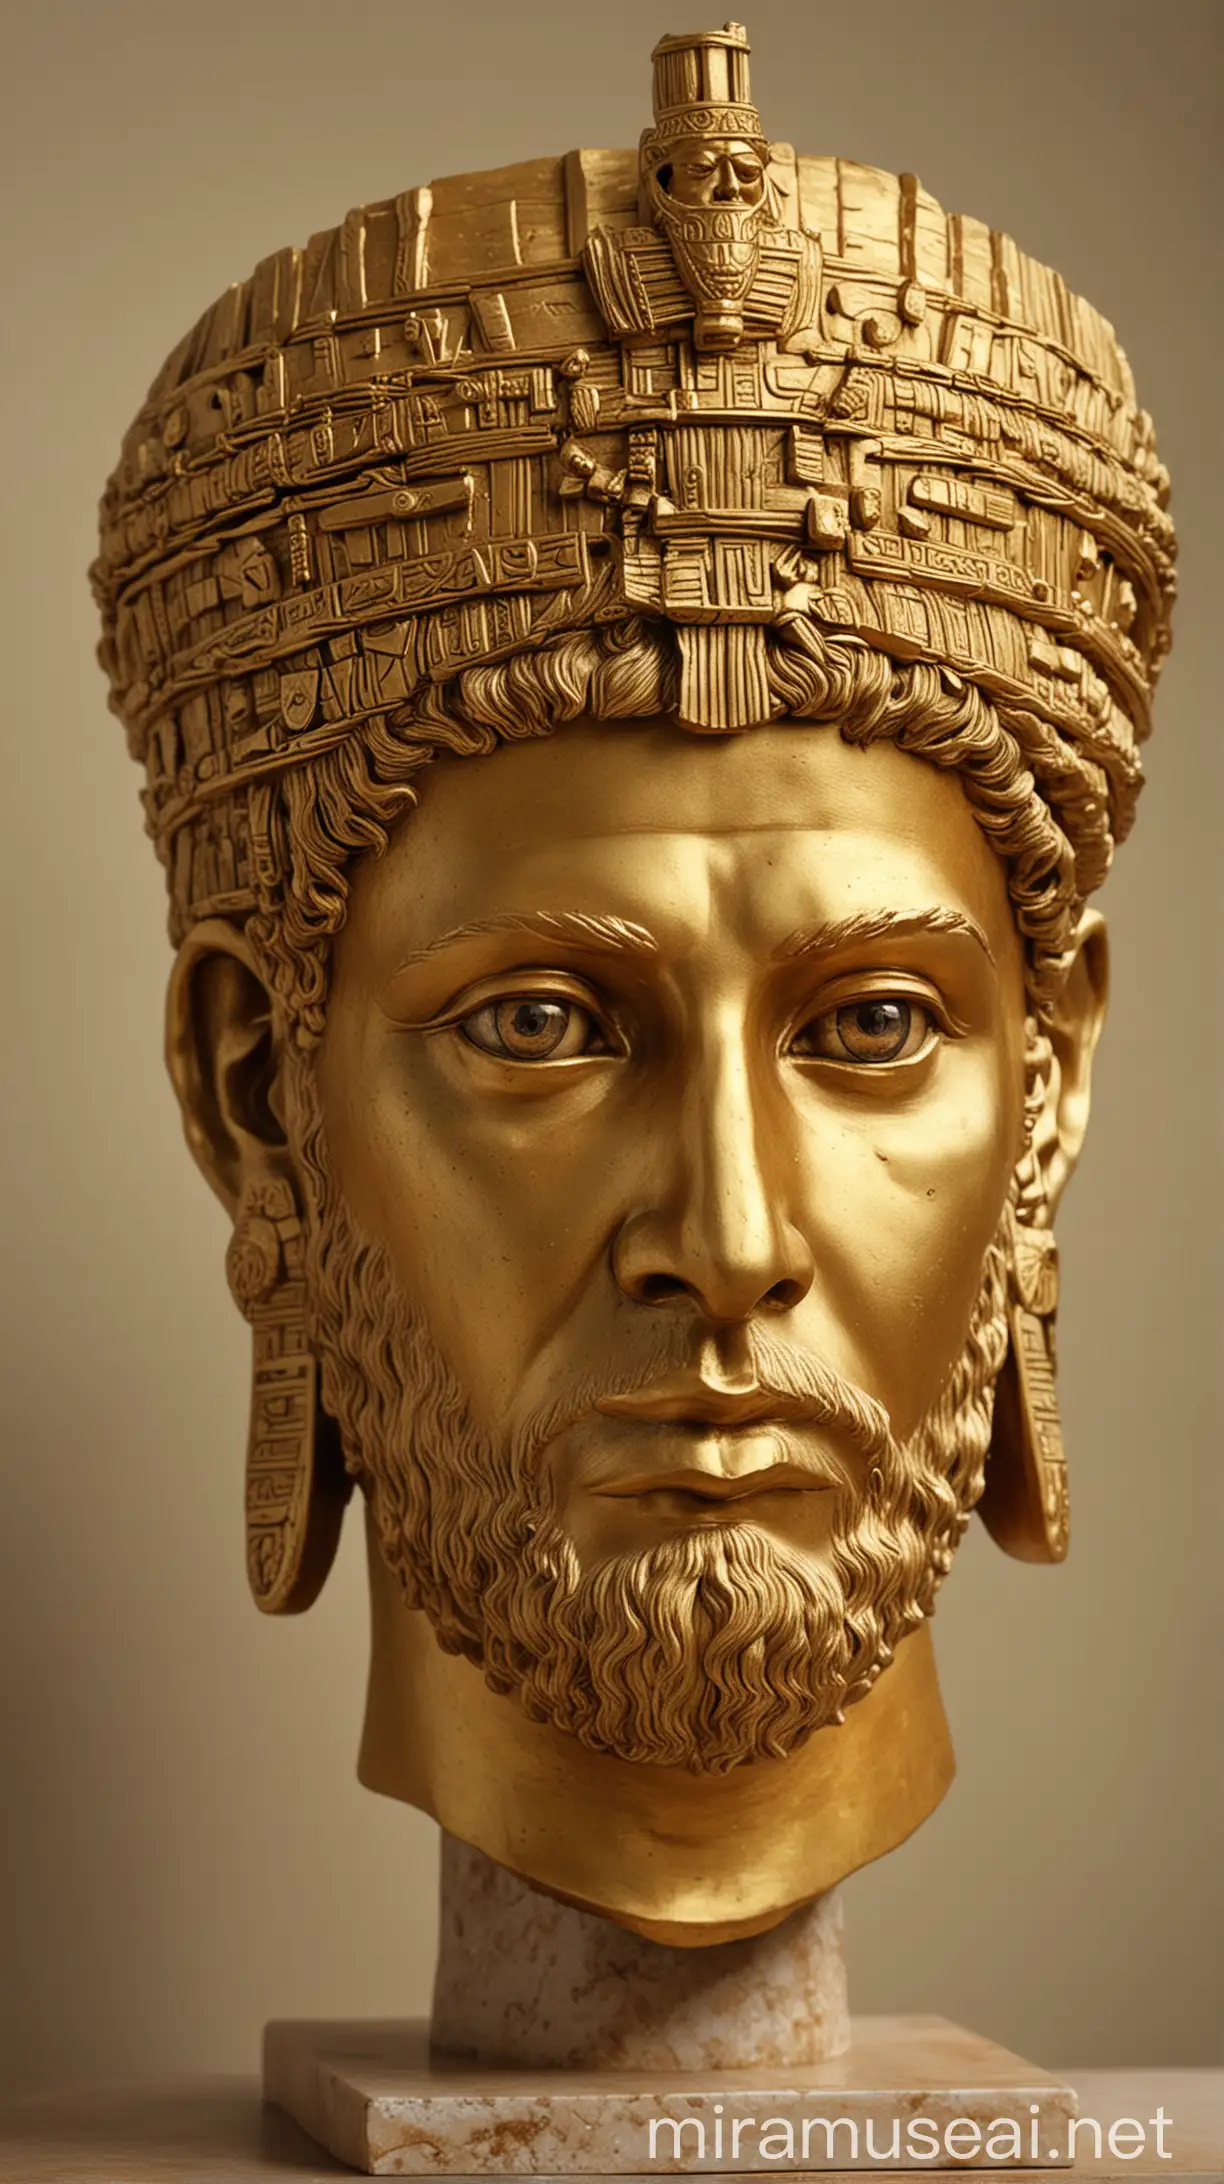 Babylonian Empire - Golden Head Statue

Prompt: Create an illustration of a majestic golden statue representing the Babylonian Empire, with intricate details and a regal crown, symbolizing its status as the "golden head" in Daniel's dream.